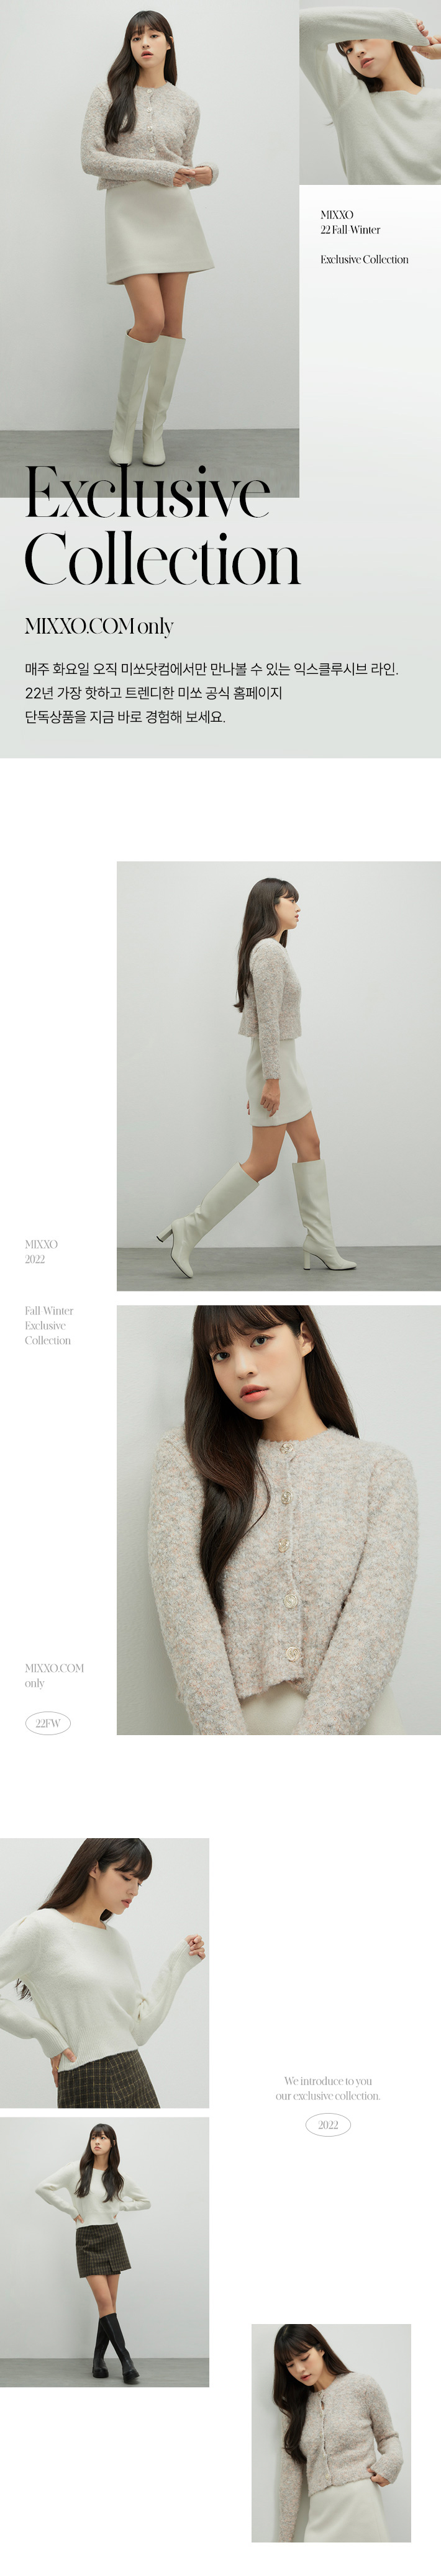 EXCLUSIVE COLLECTION - 미쏘